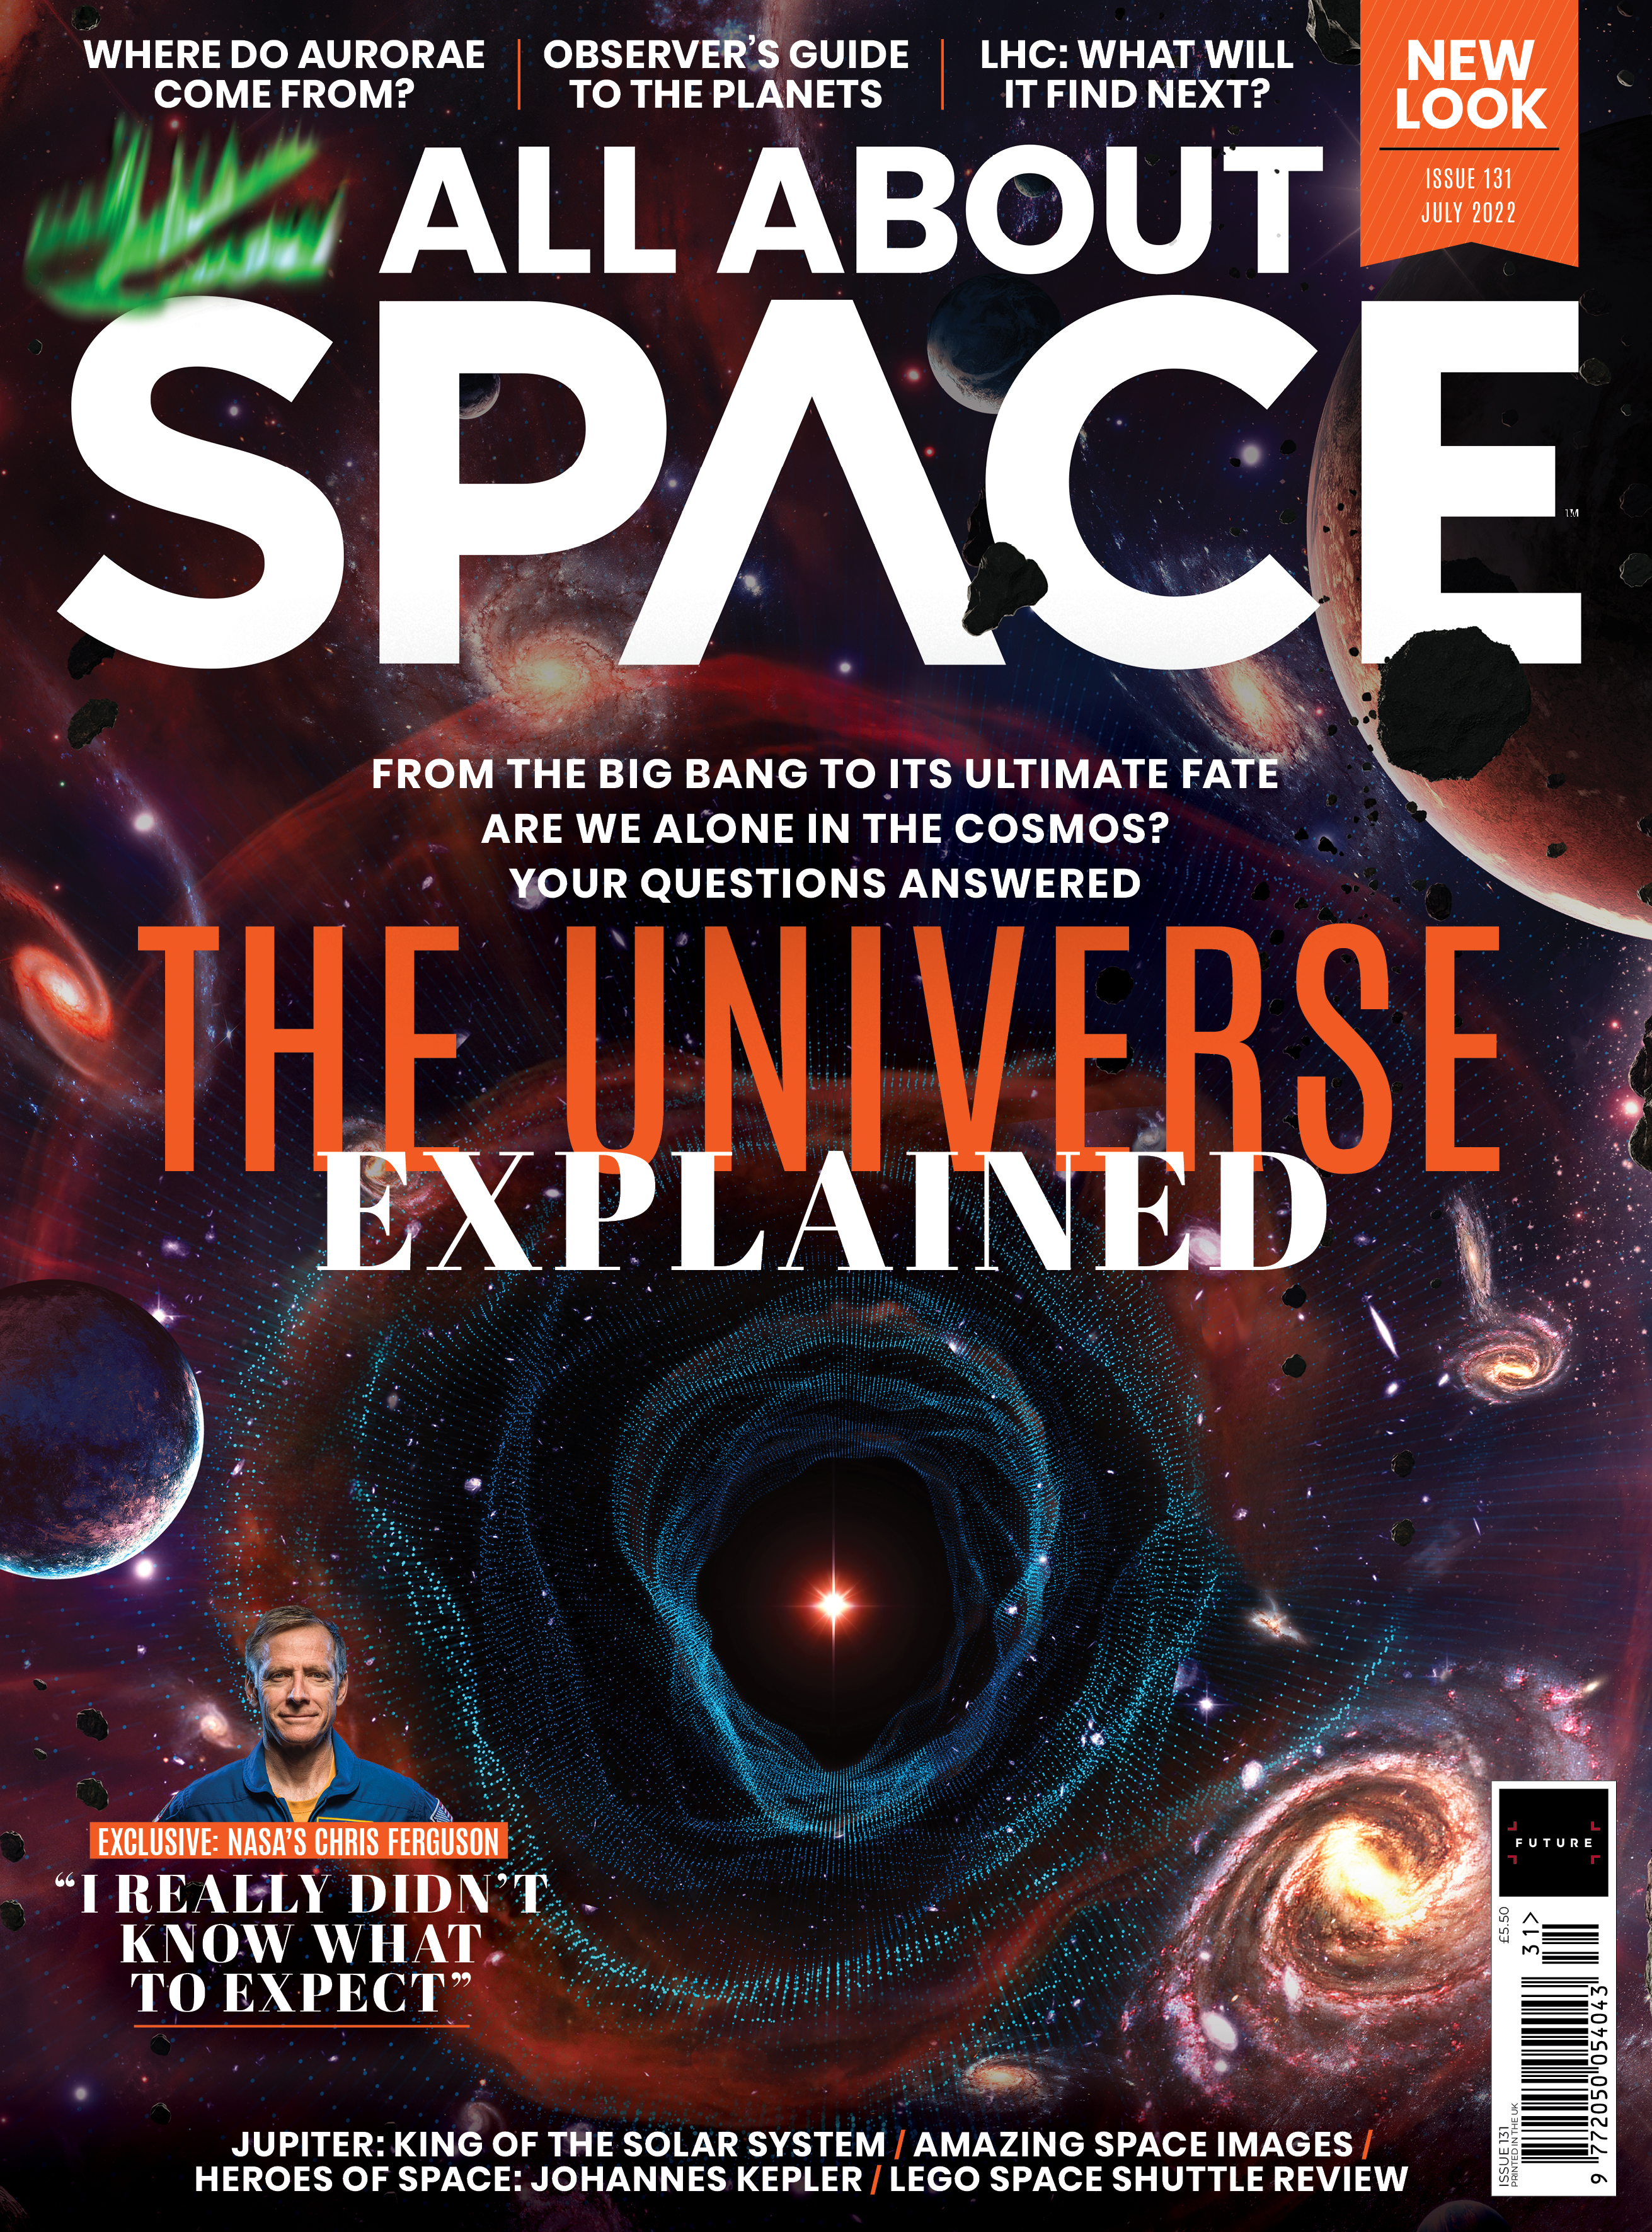 All About Space magazine issue 131 is out now.